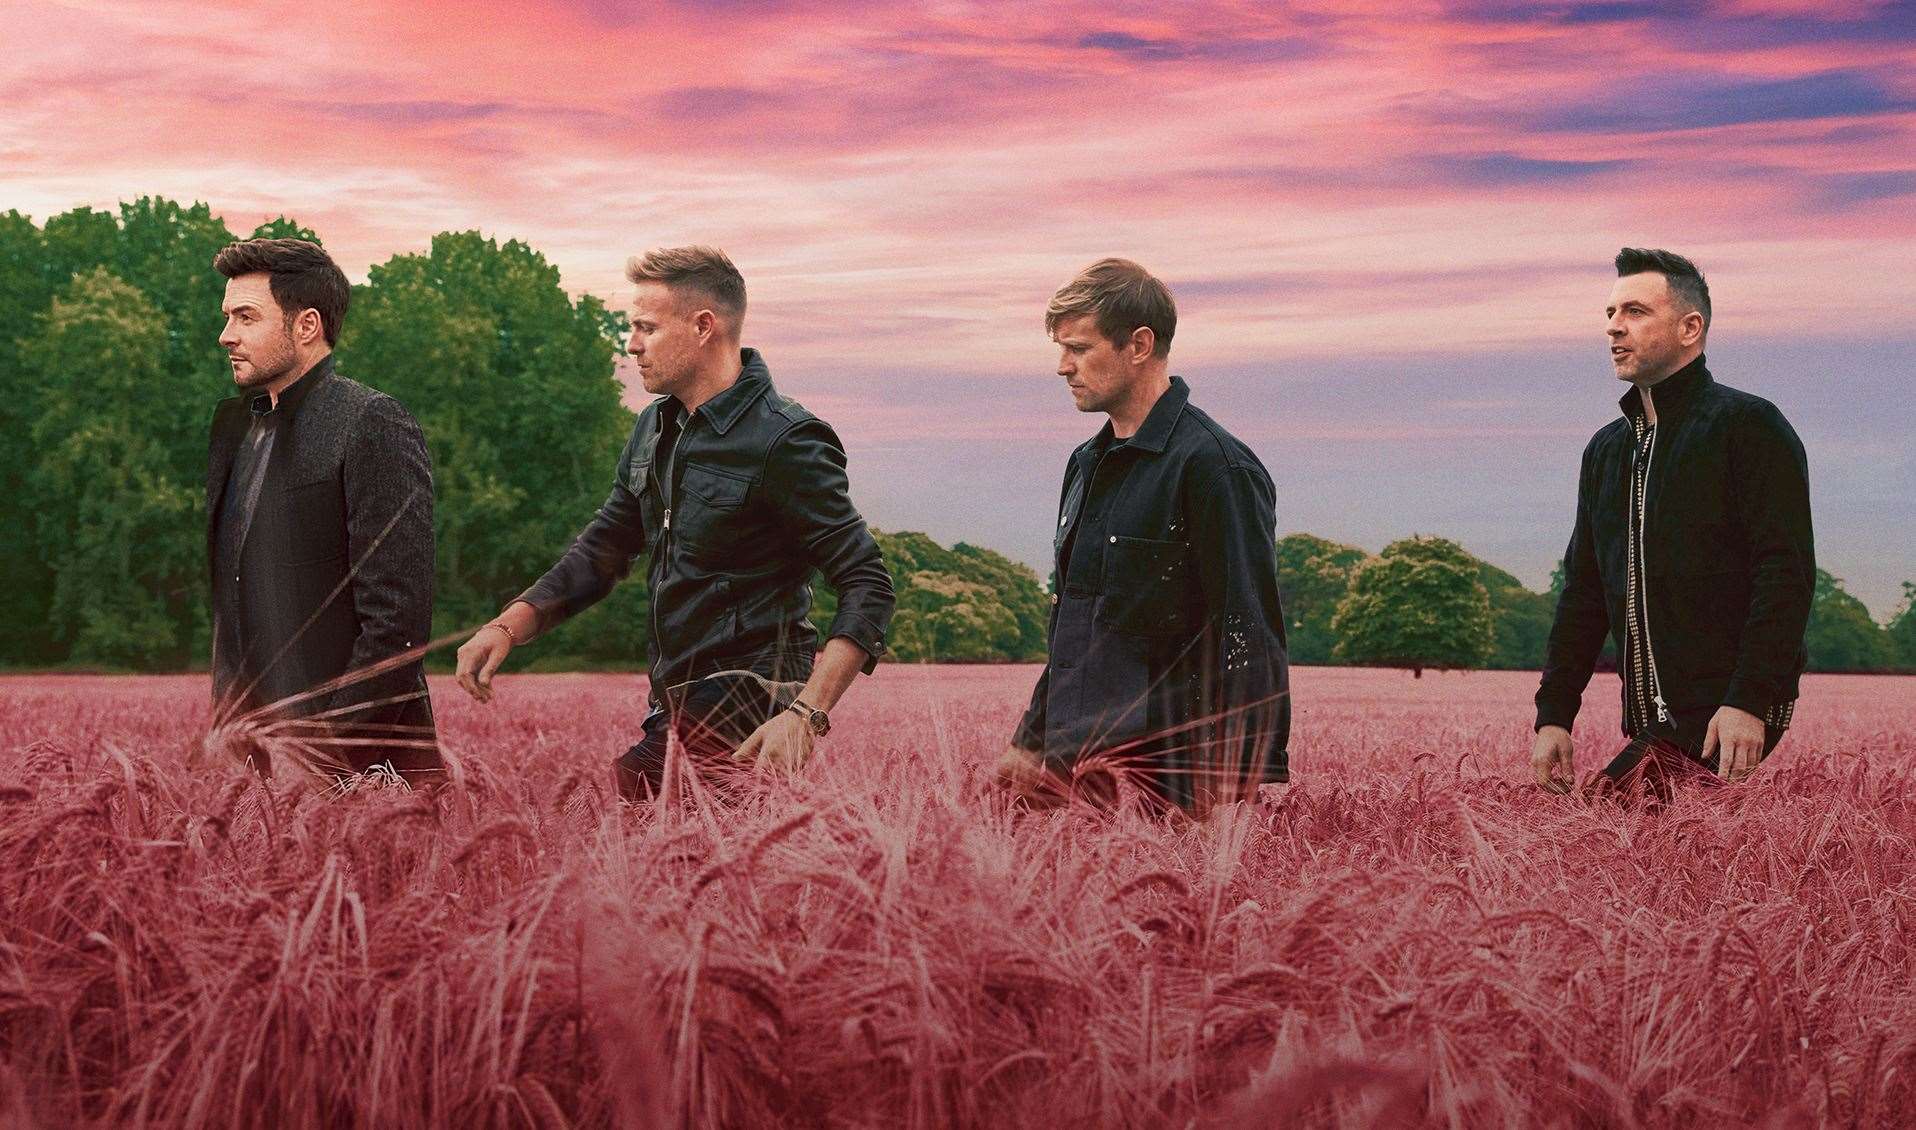 Irish boyband Westlife will be returning to Kent this summer with a concert at the Hop Farm